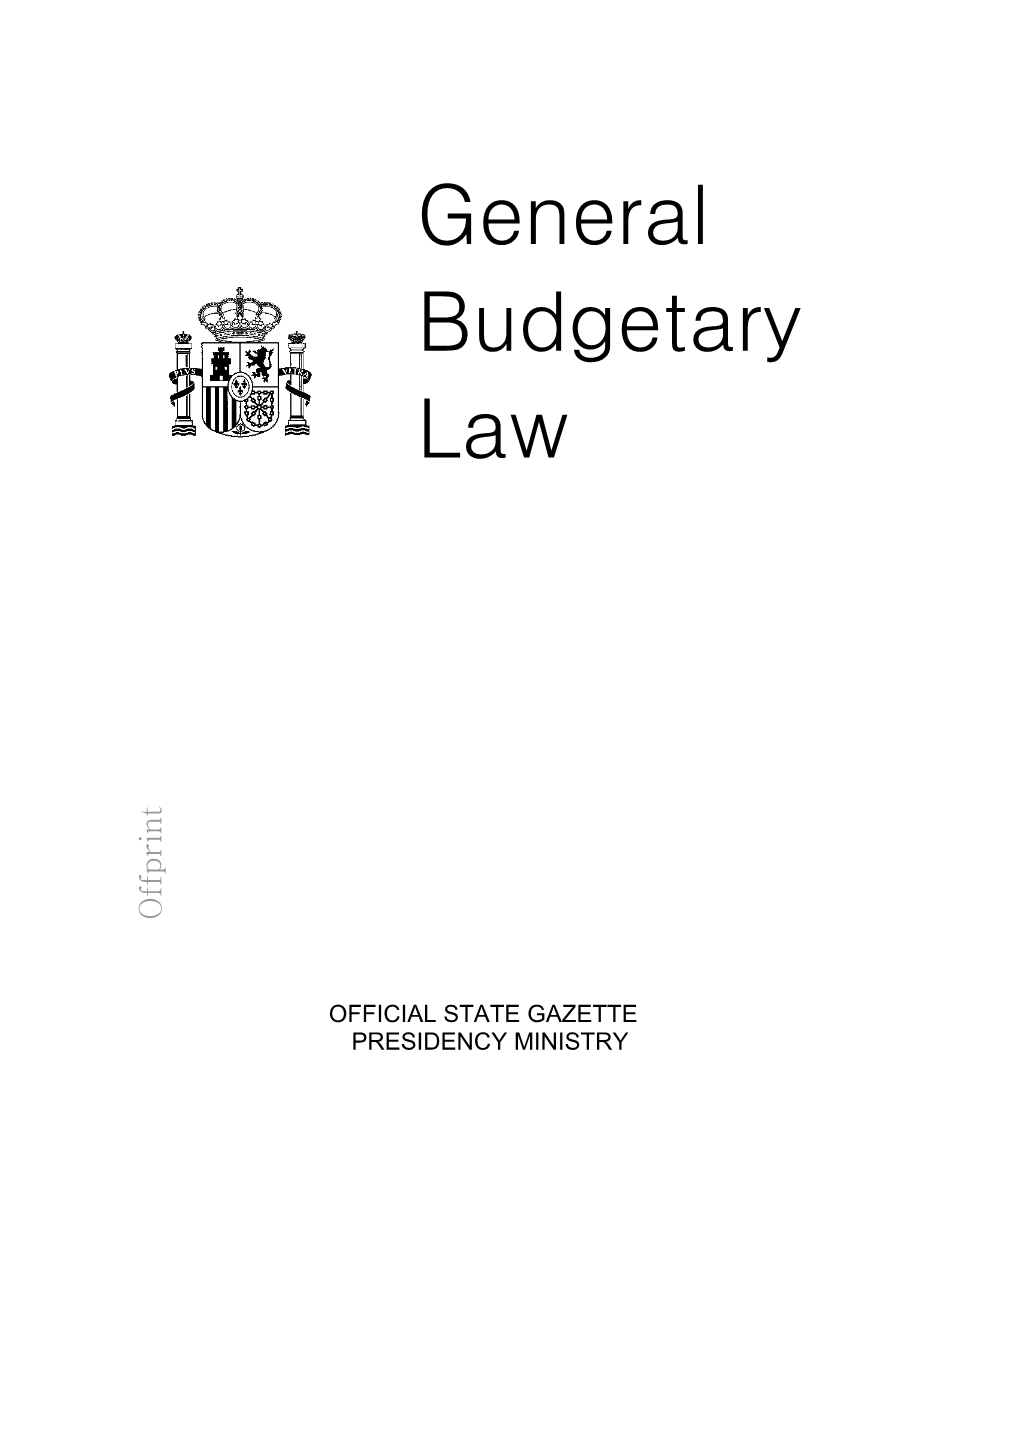 General Budget Law 47/2003 of 26 November 8 (Head of State)